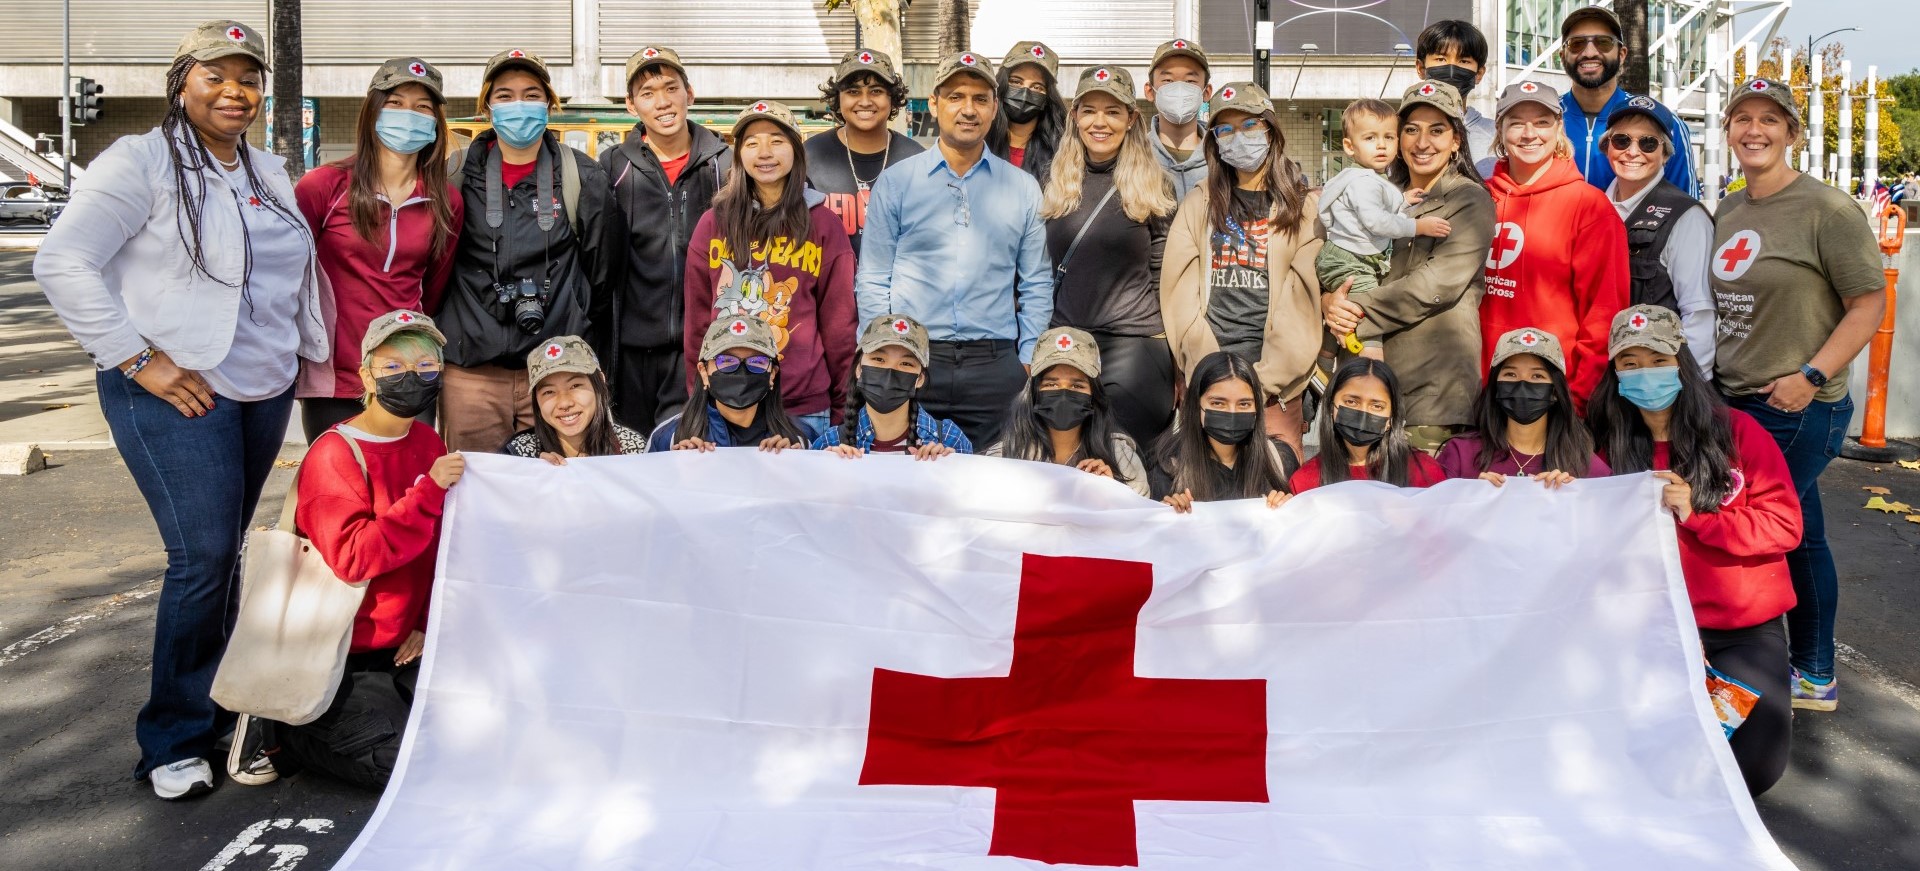 A group of people holding a red cross flag